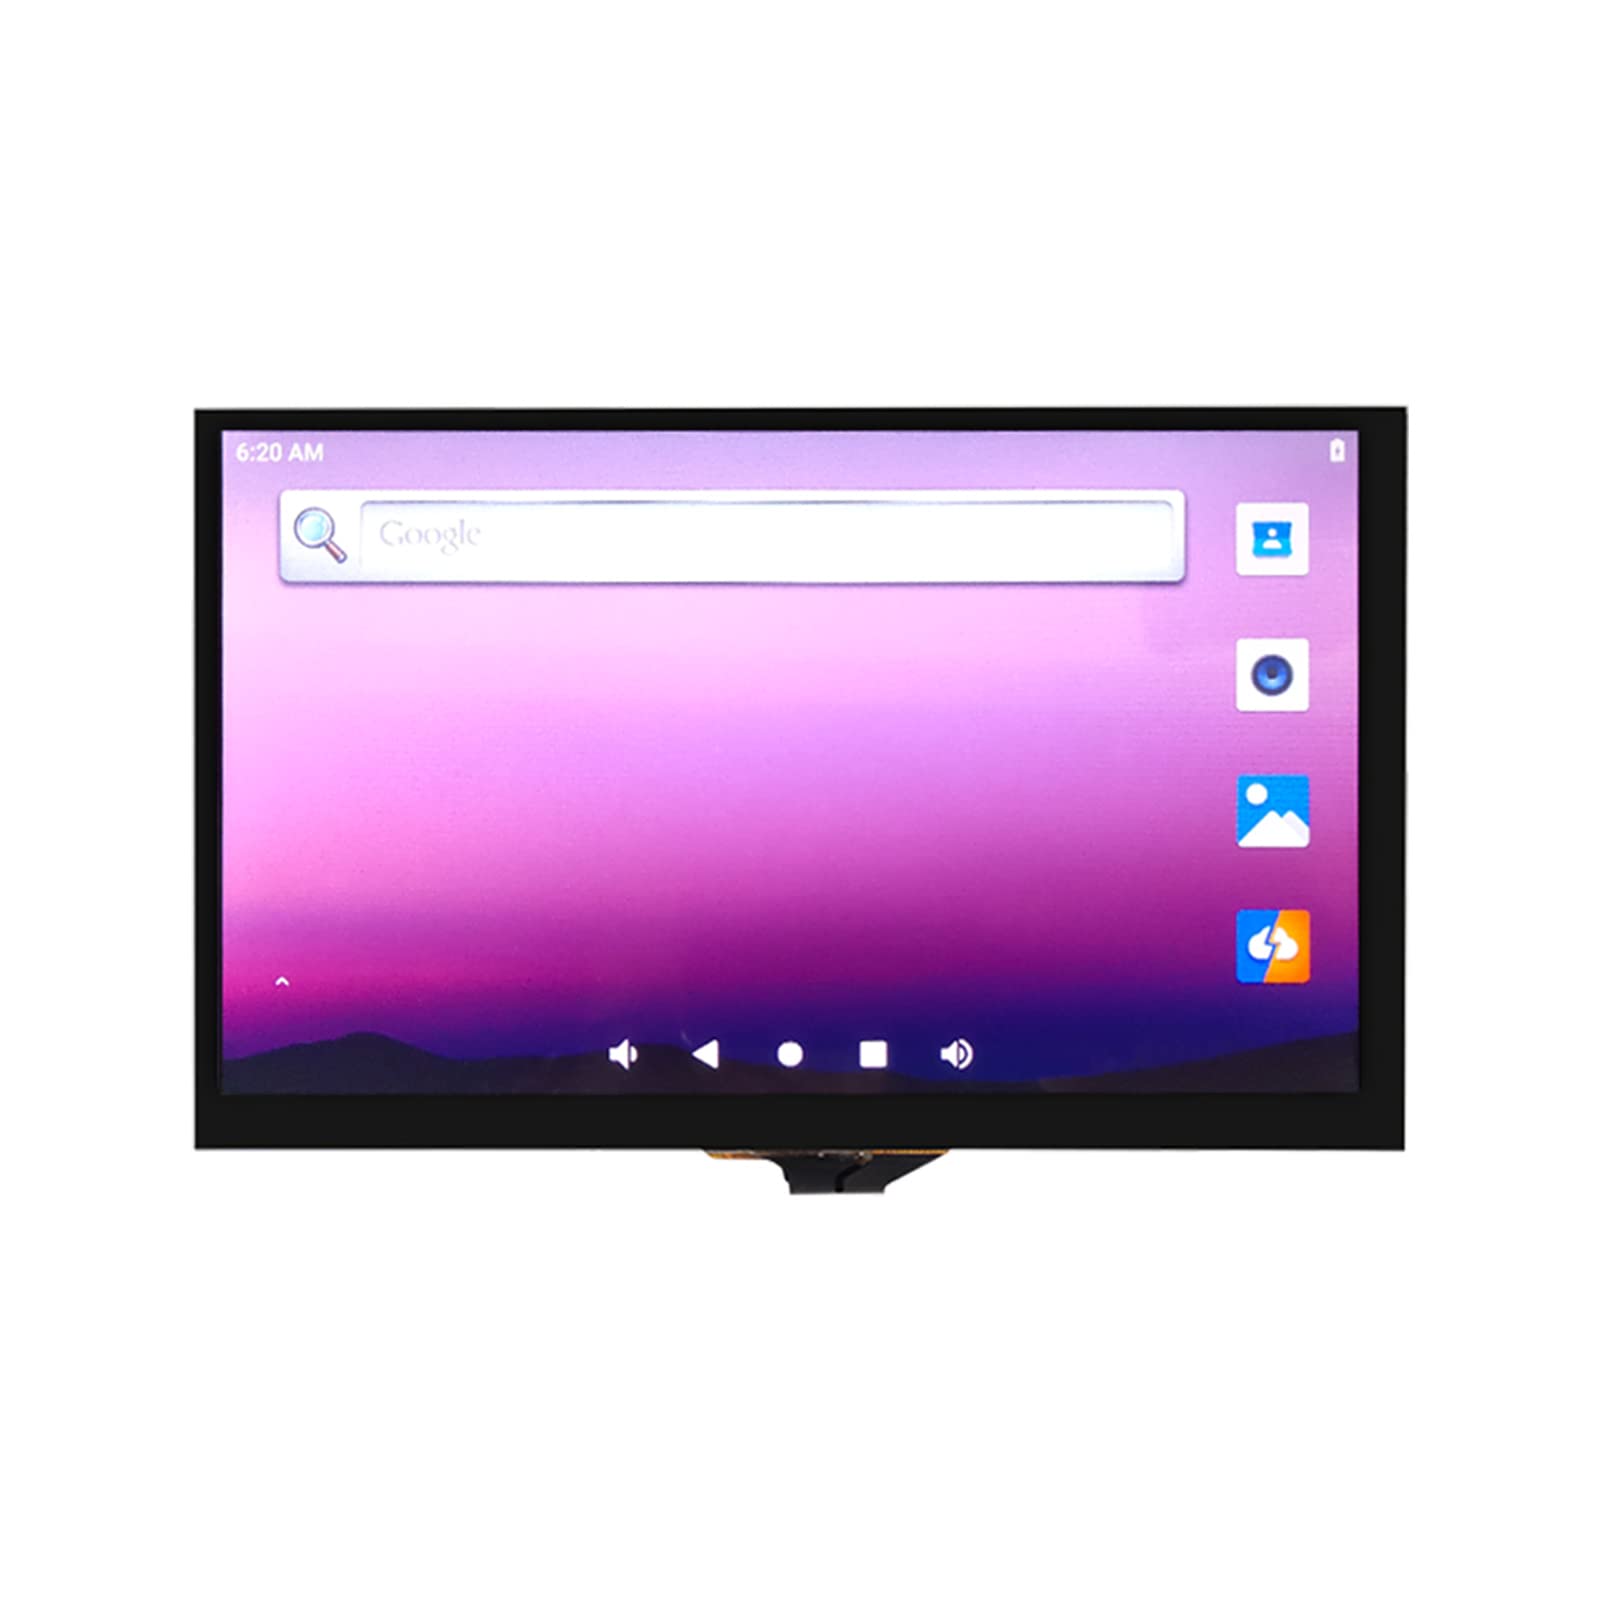 WayPonDEV YYT MIPI7LCD 2203 Screen Touchscreen 7 Inch Mini HDMI Monitor LCD Screen 1024x600 Compatible with Tinker Board 2S/RK3568J/RK3568PC/ITX-3588J Support Debian Ubuntu System